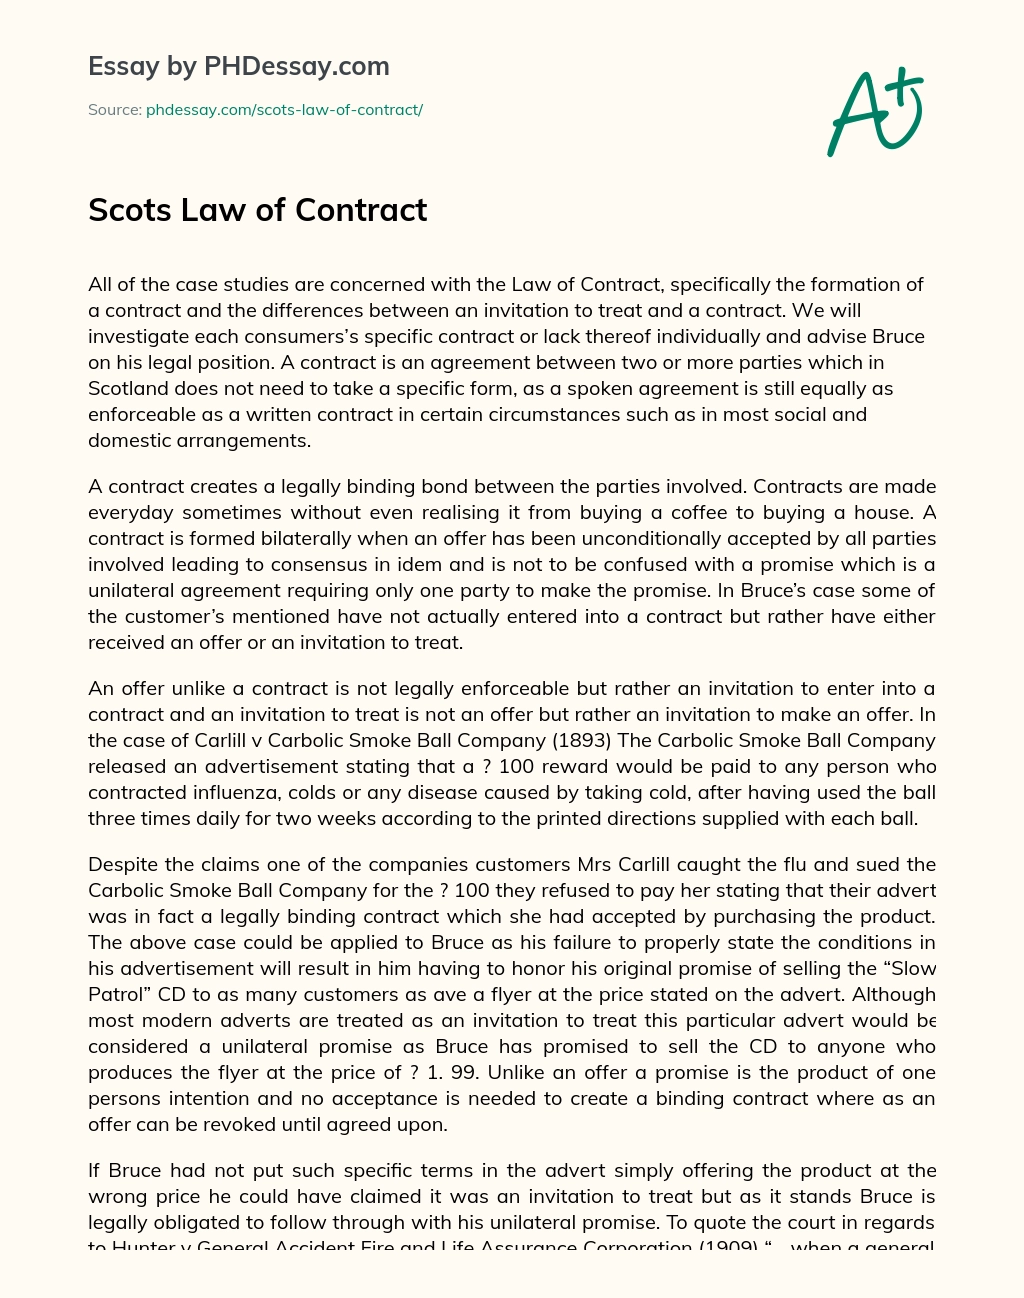 Scots Law of Contract essay